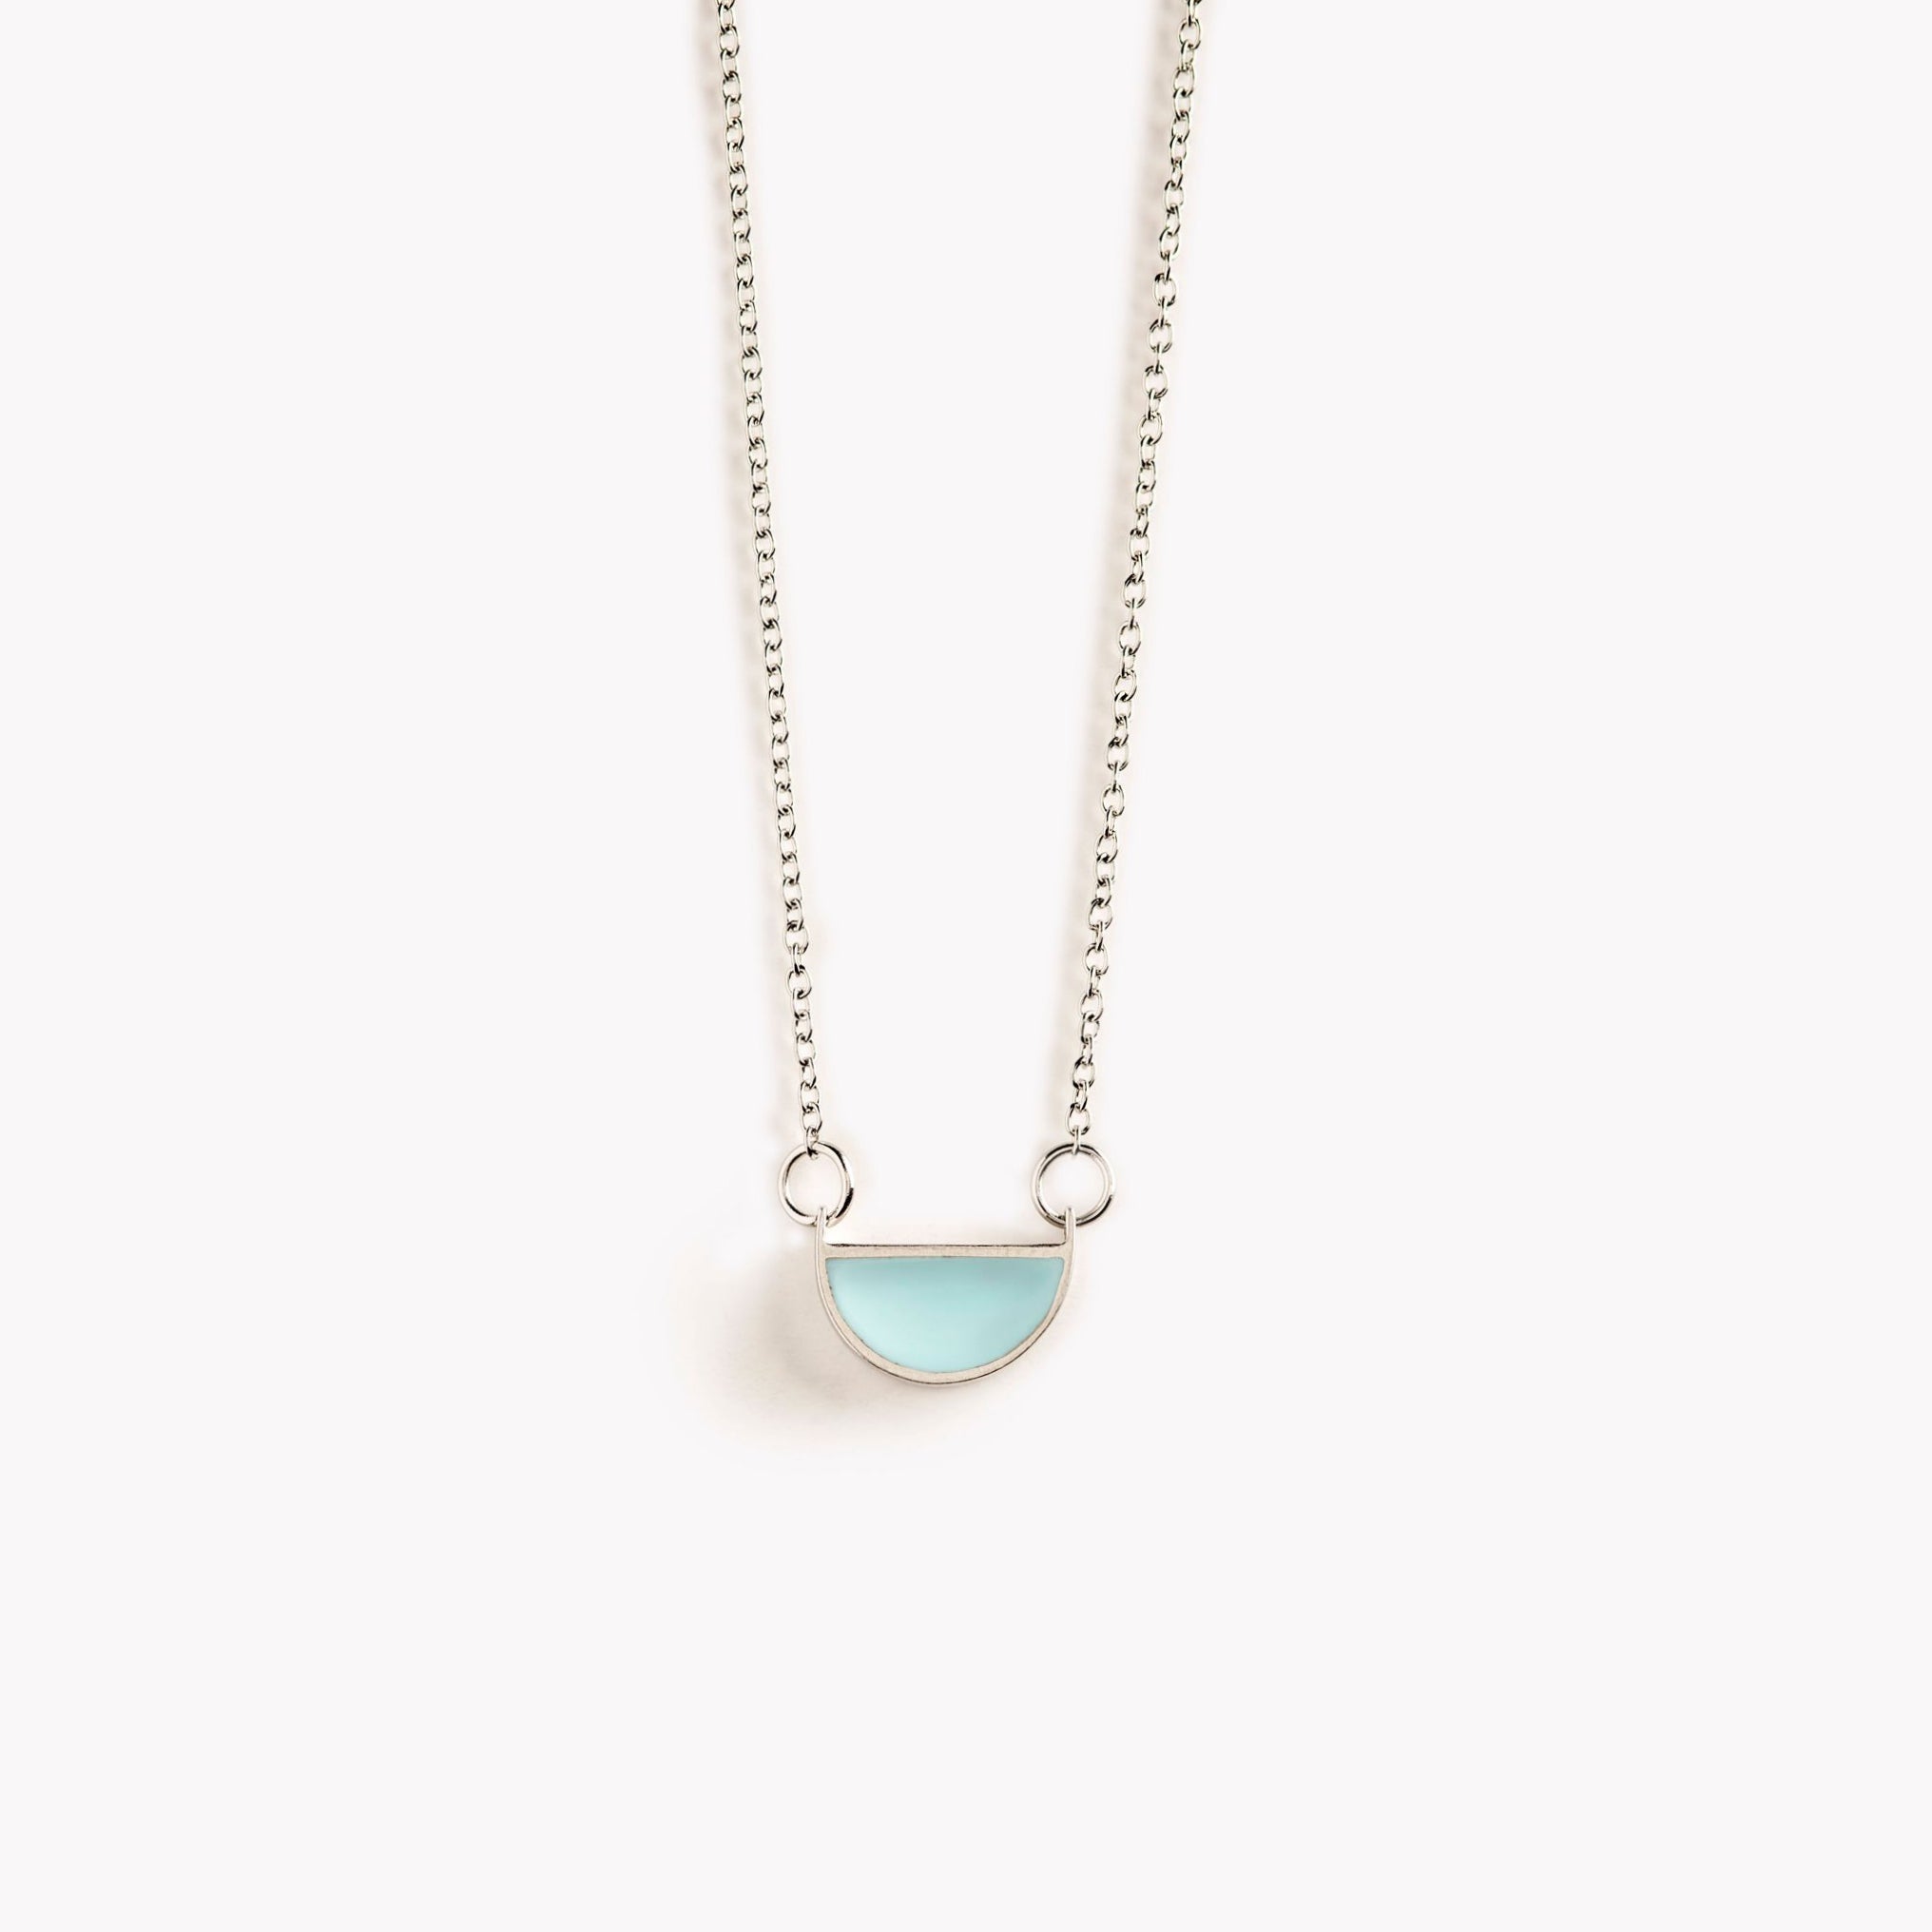 A simple, pale turquoise, half circle shaped pendant necklace.